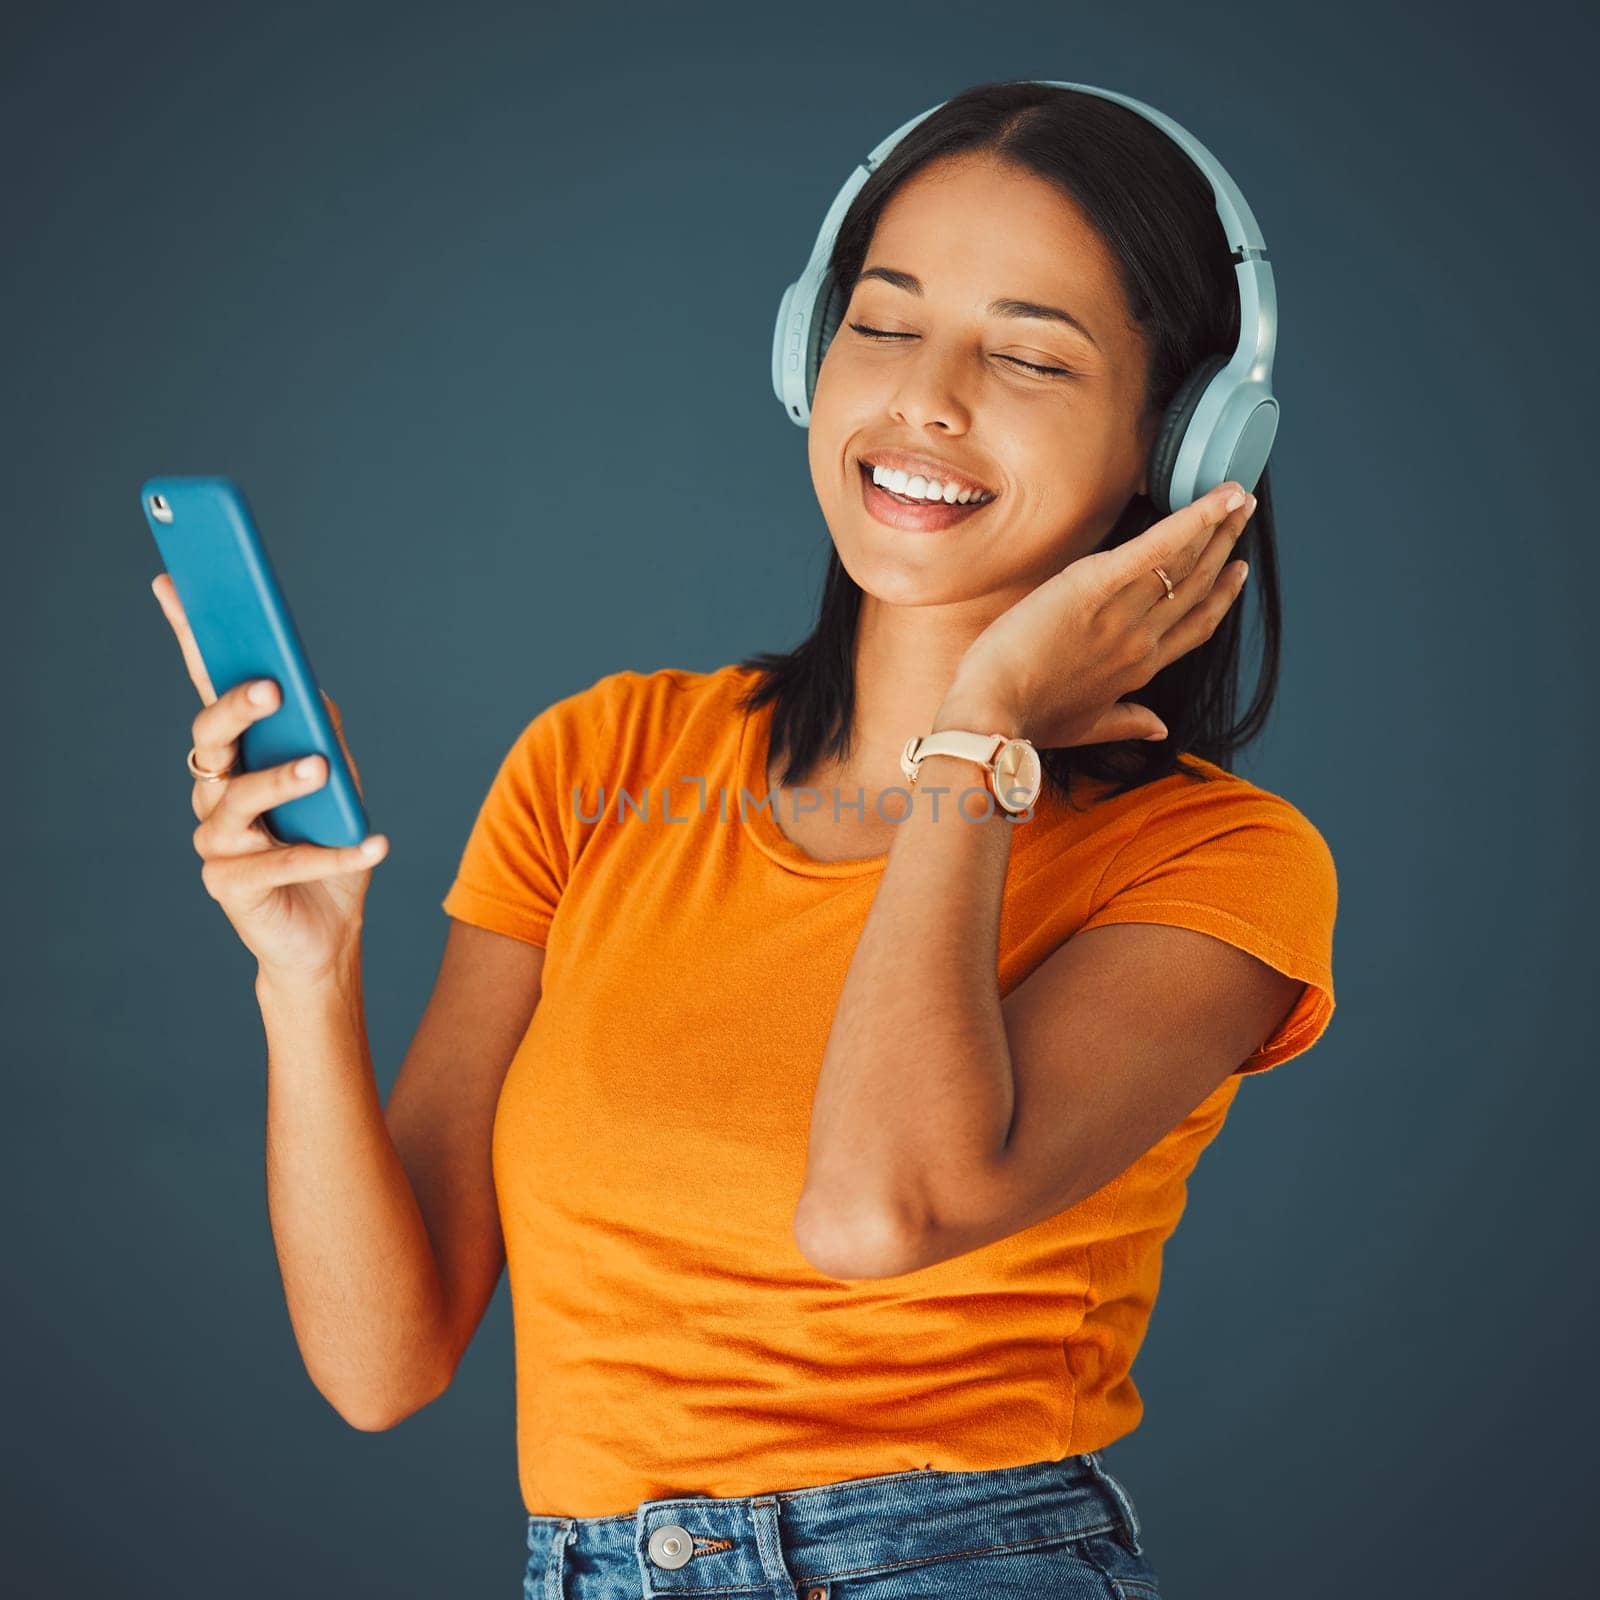 Radio, headphones and woman listening to music on phone or mobile app isolated against a studio background. Fun, sound and female enjoying and streaming a podcast or audio smiling and happy by YuriArcurs